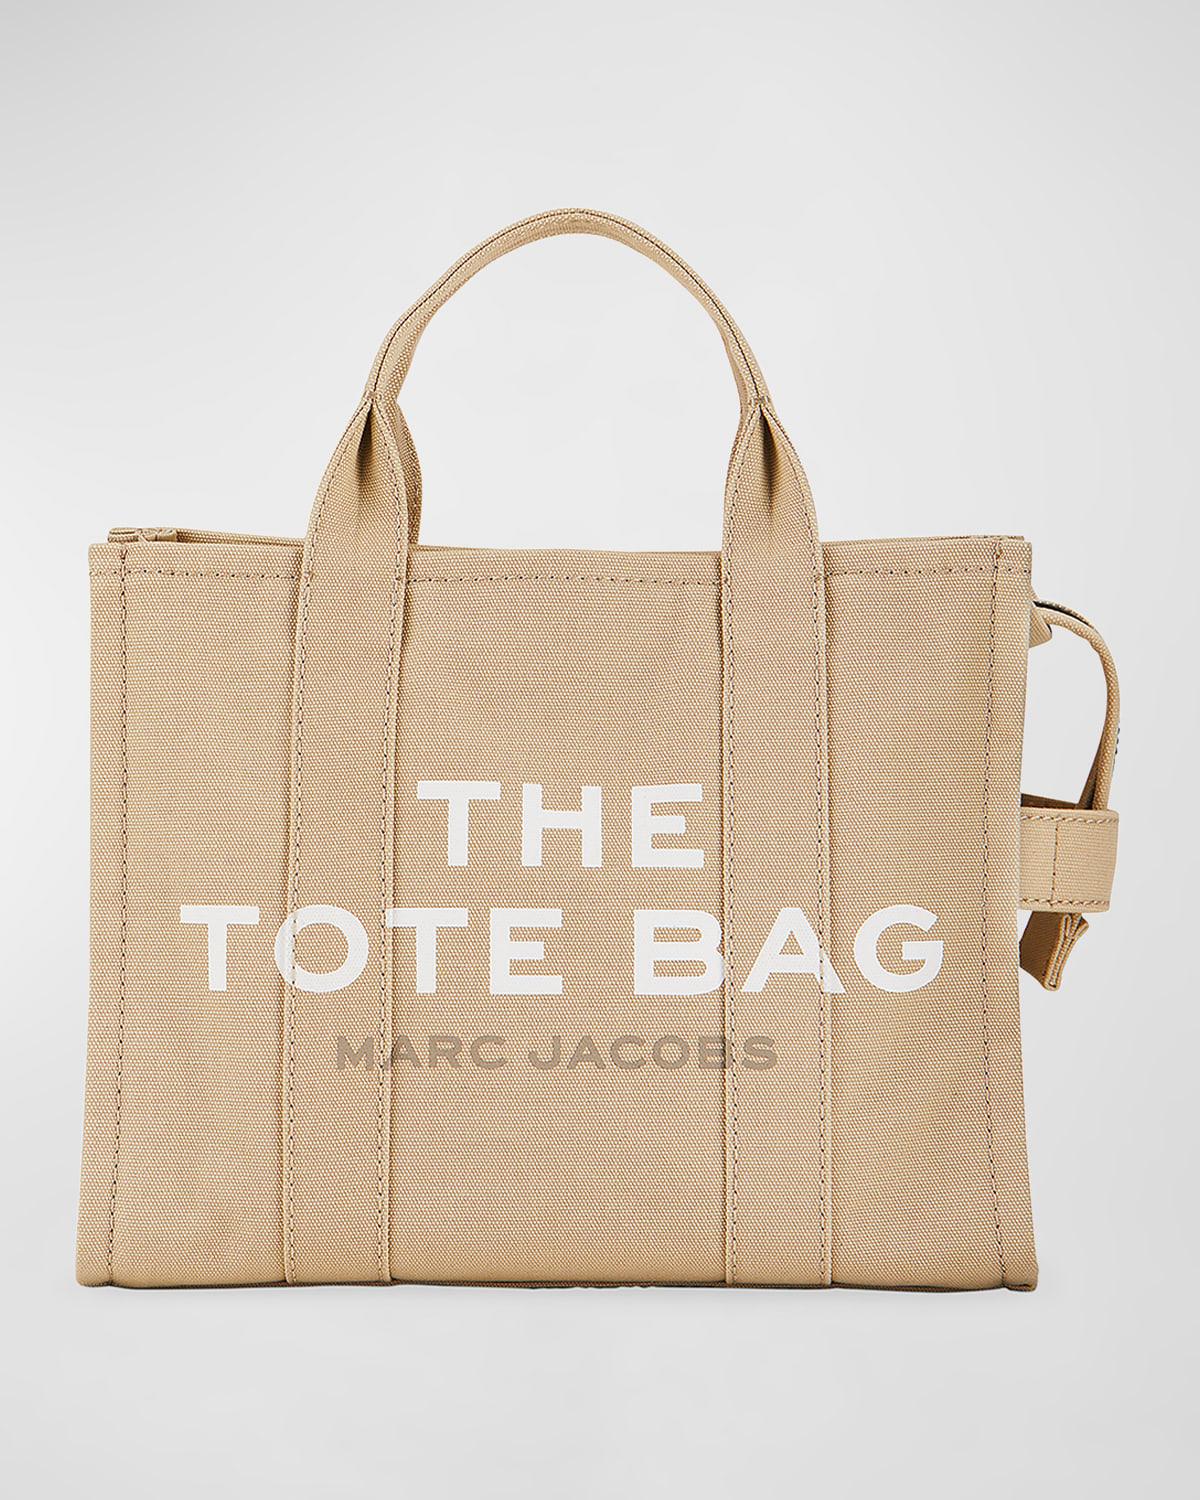 Marc Jacobs The Medium Tote Bag in Natural | Lyst